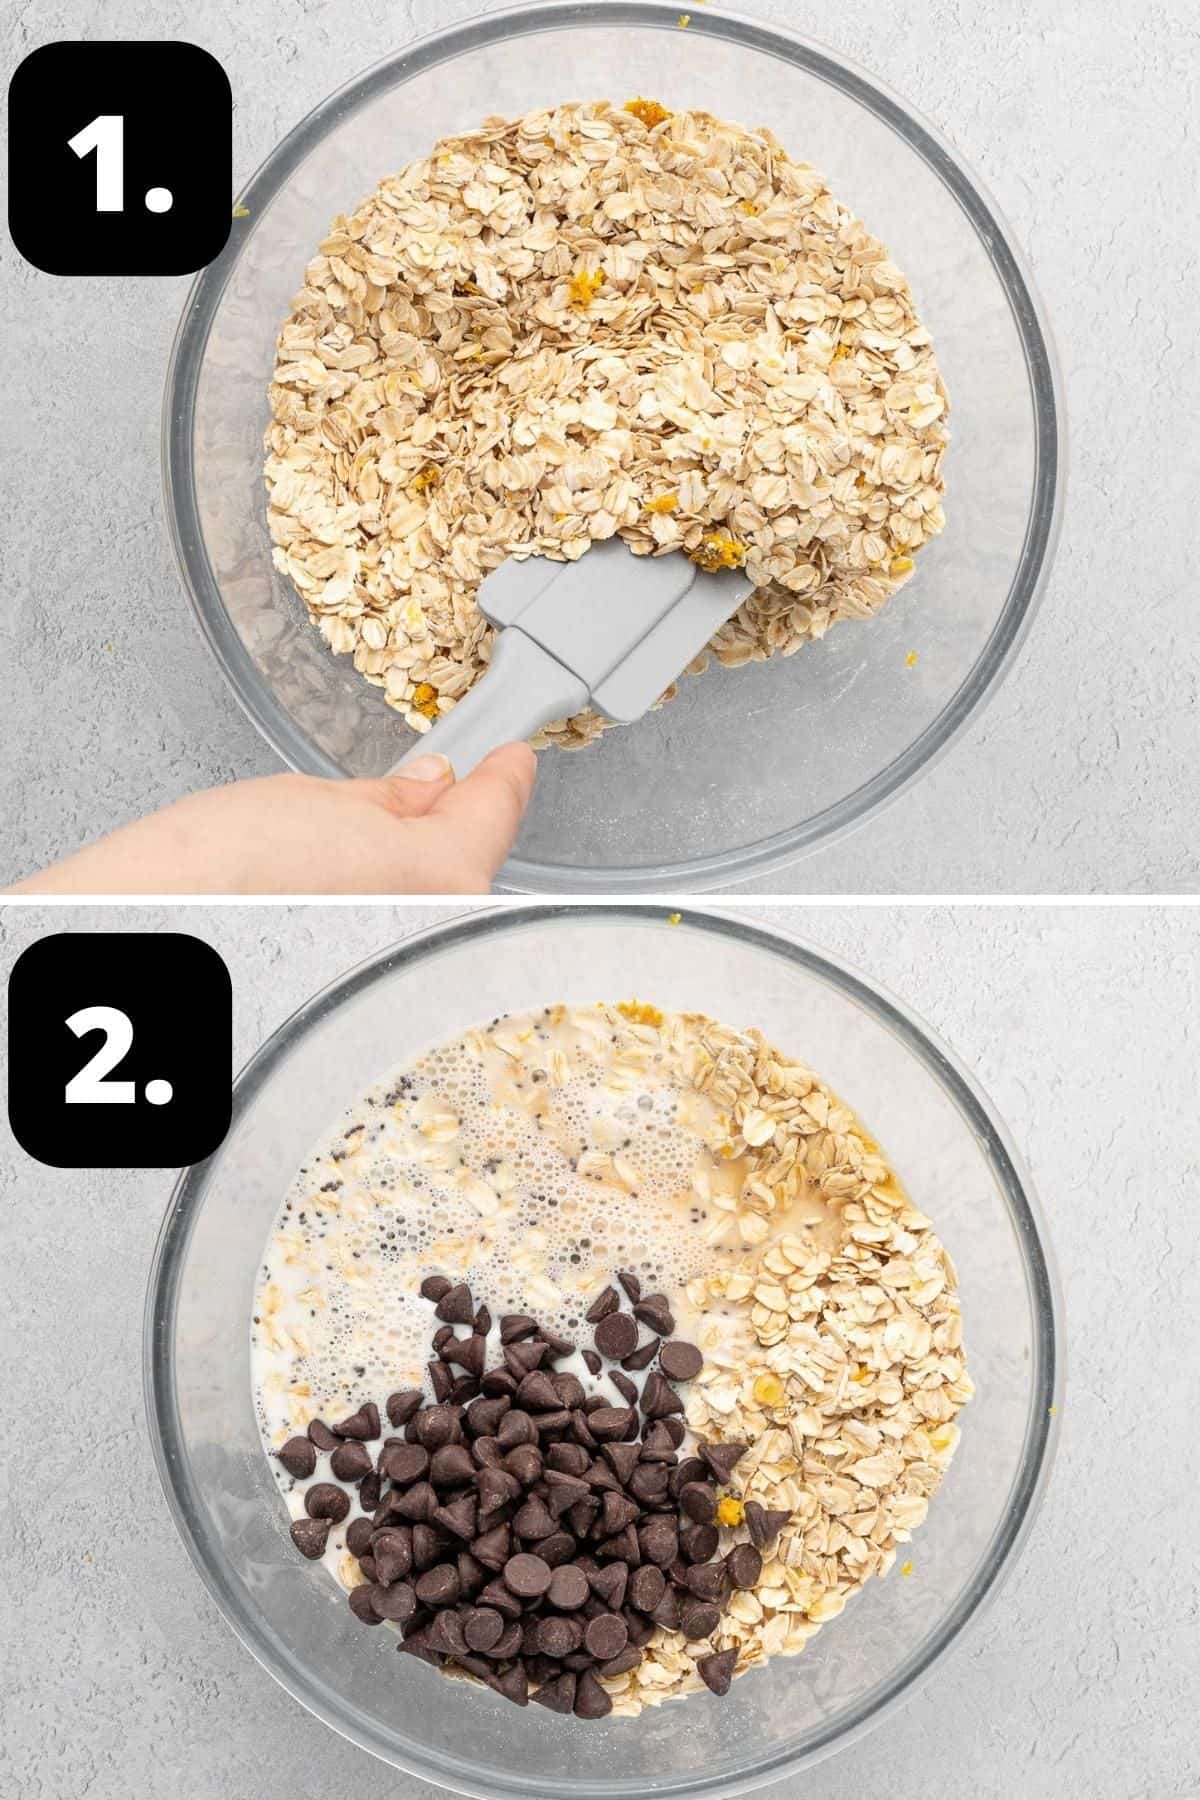 Steps 1-2 of preparing this recipe - mixing the dried ingredients in a bowl and adding in the milk and chocolate chips to bowl.